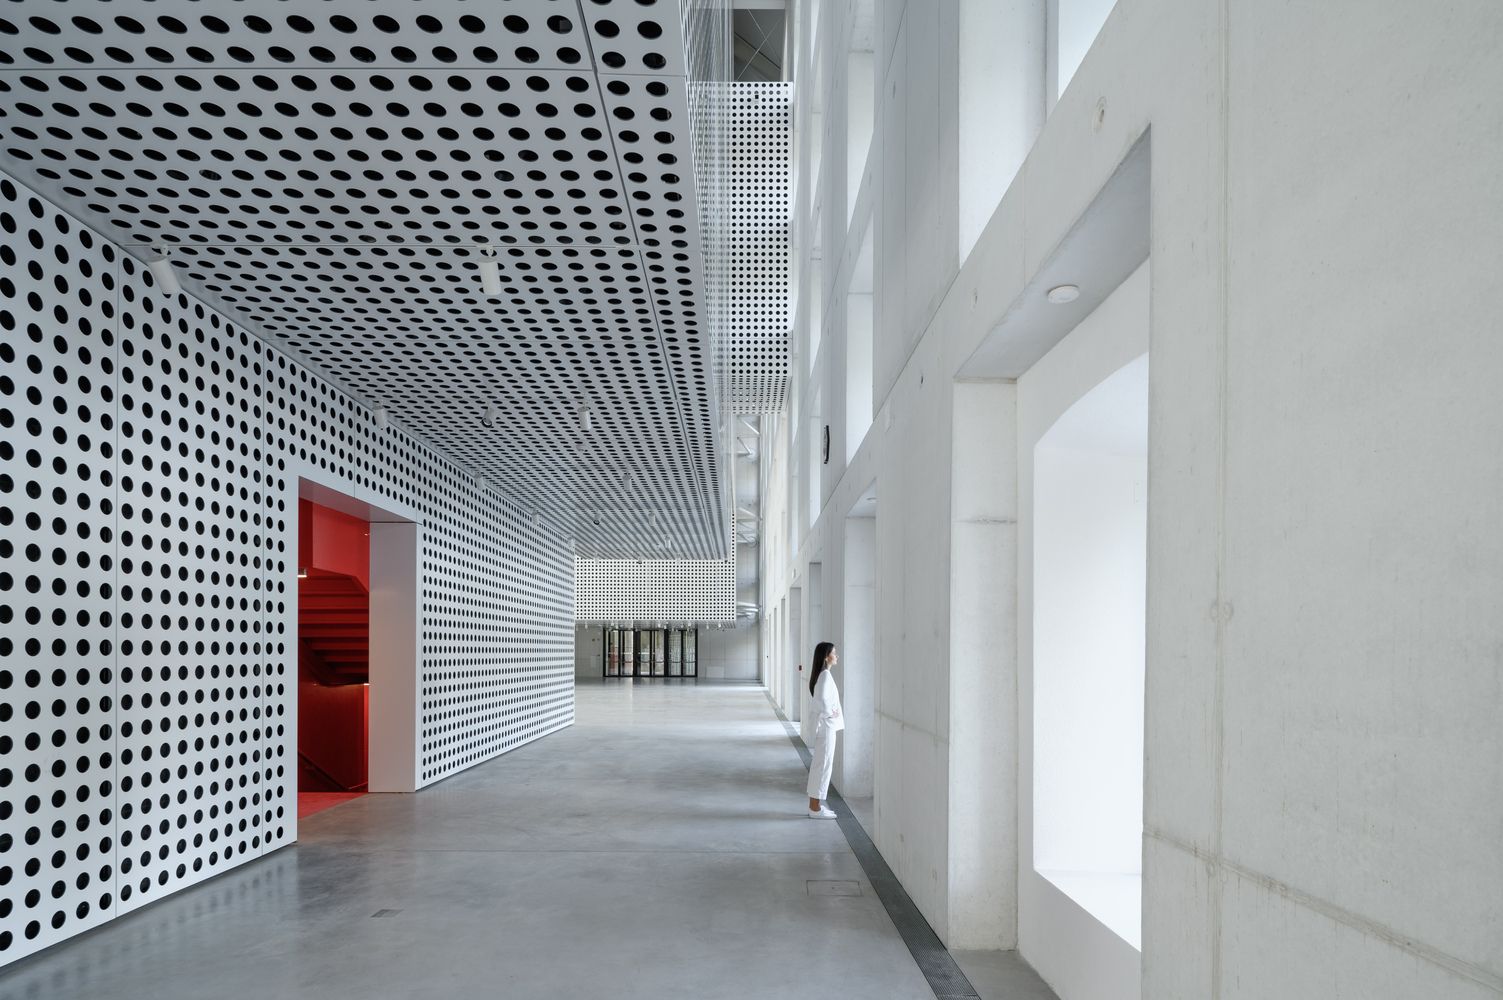 This is what a well-designed contemporary art space looks like